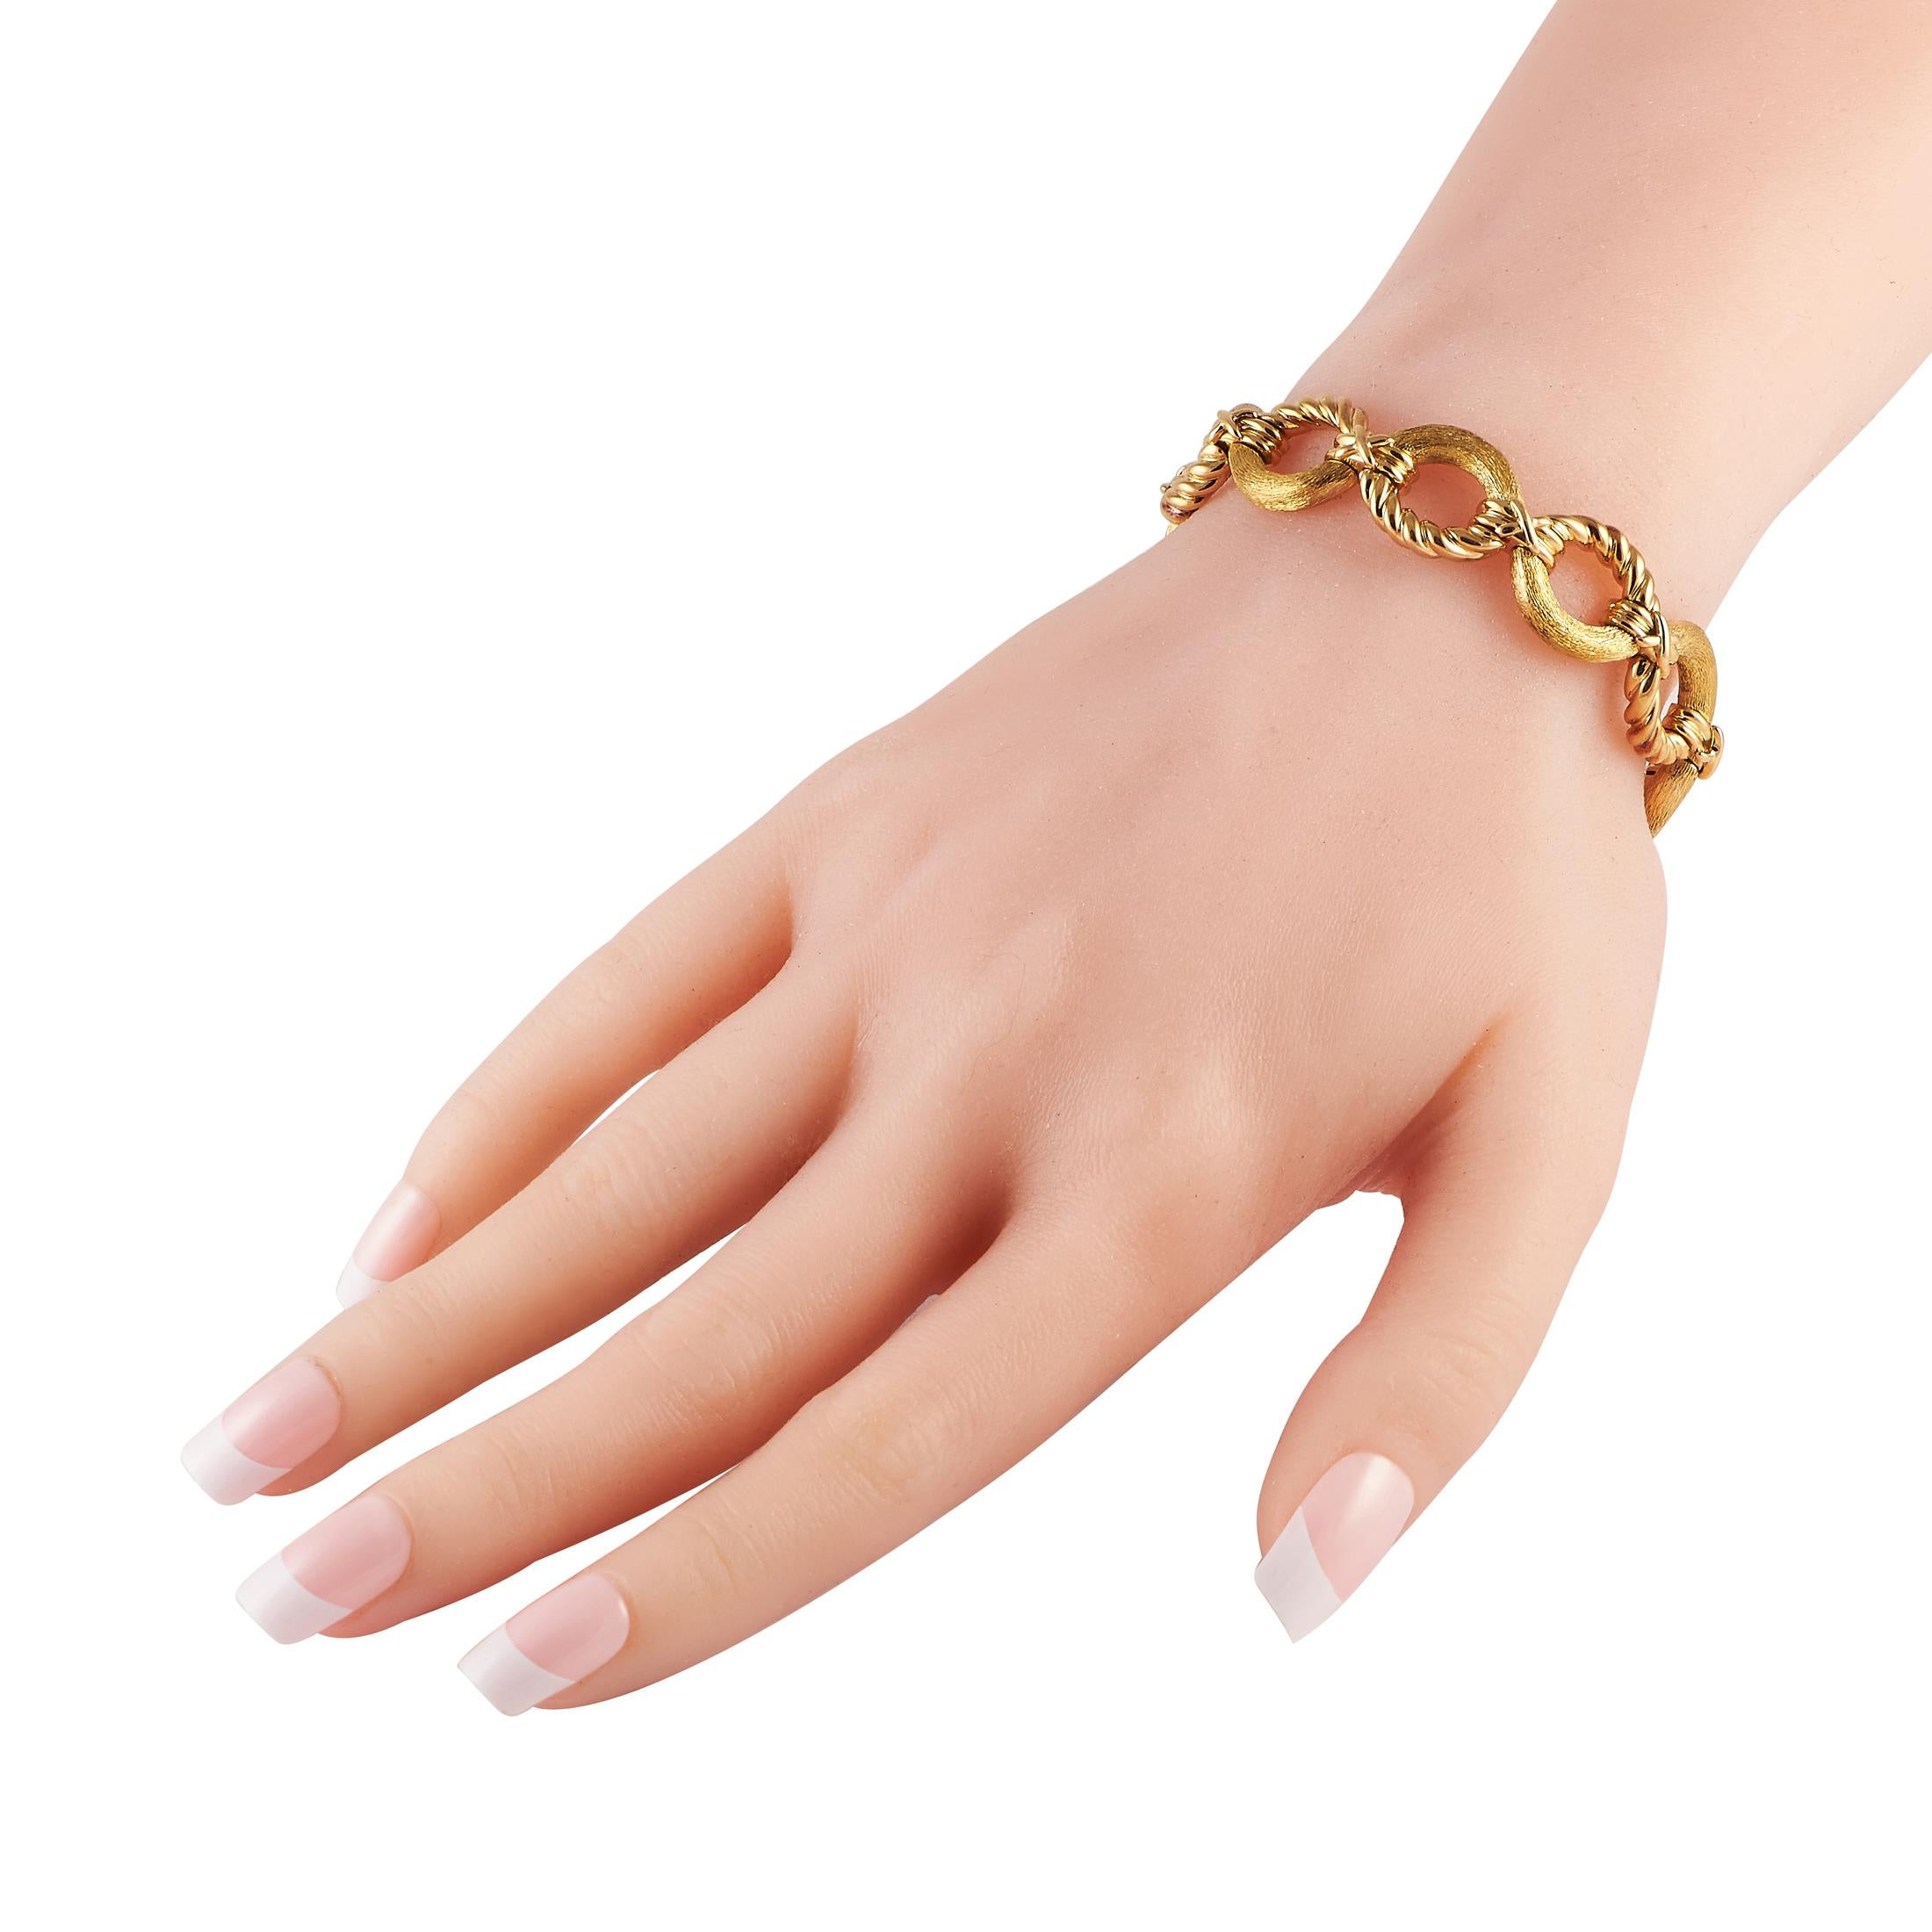 This Tiffany & Co. Schlumburger bracelet is simply exquisite to behold. Crafted from 18K Yellow Gold, differing textures on the dramatic links add dimension to this opulent accessory. This bracelet measures 7.25” long. 
 
 This jewelry piece is